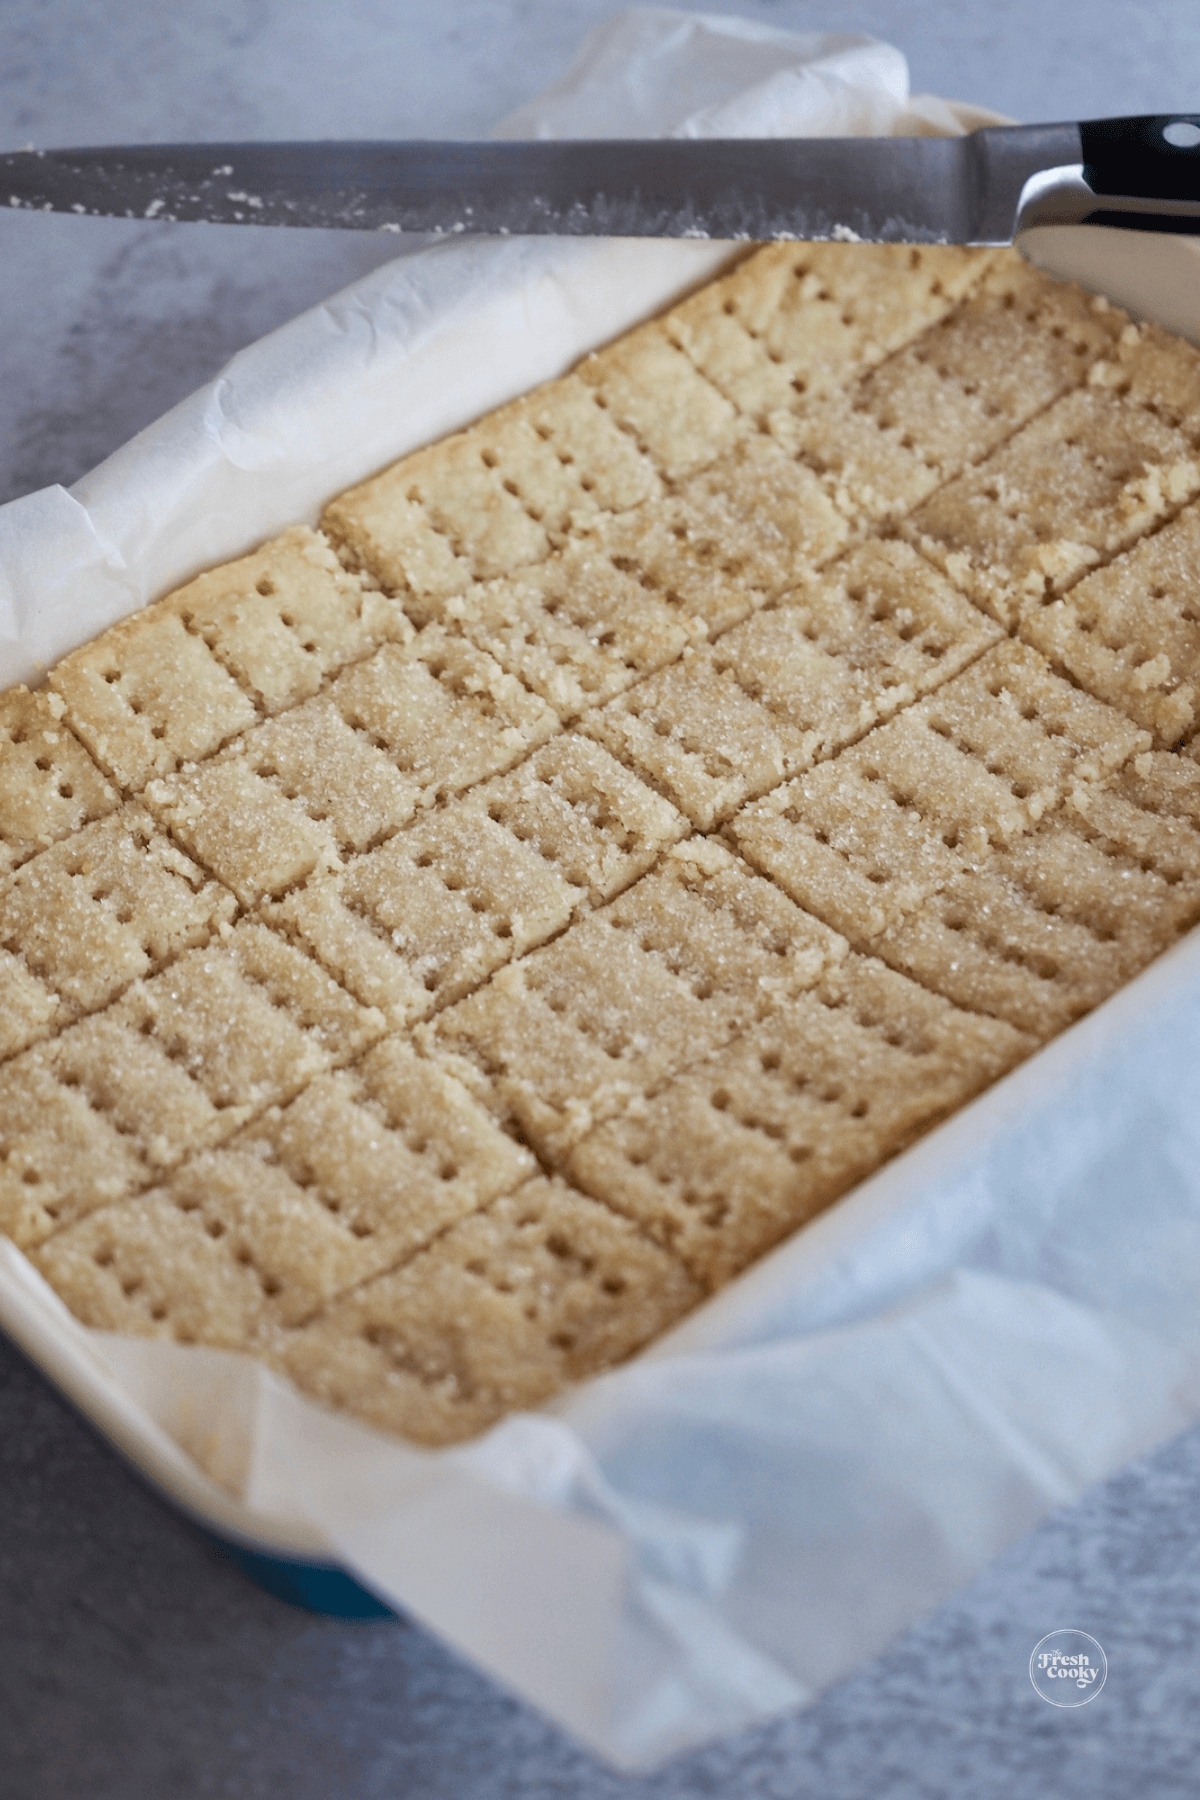 Baked Scotch shortbread recipe cooling. 